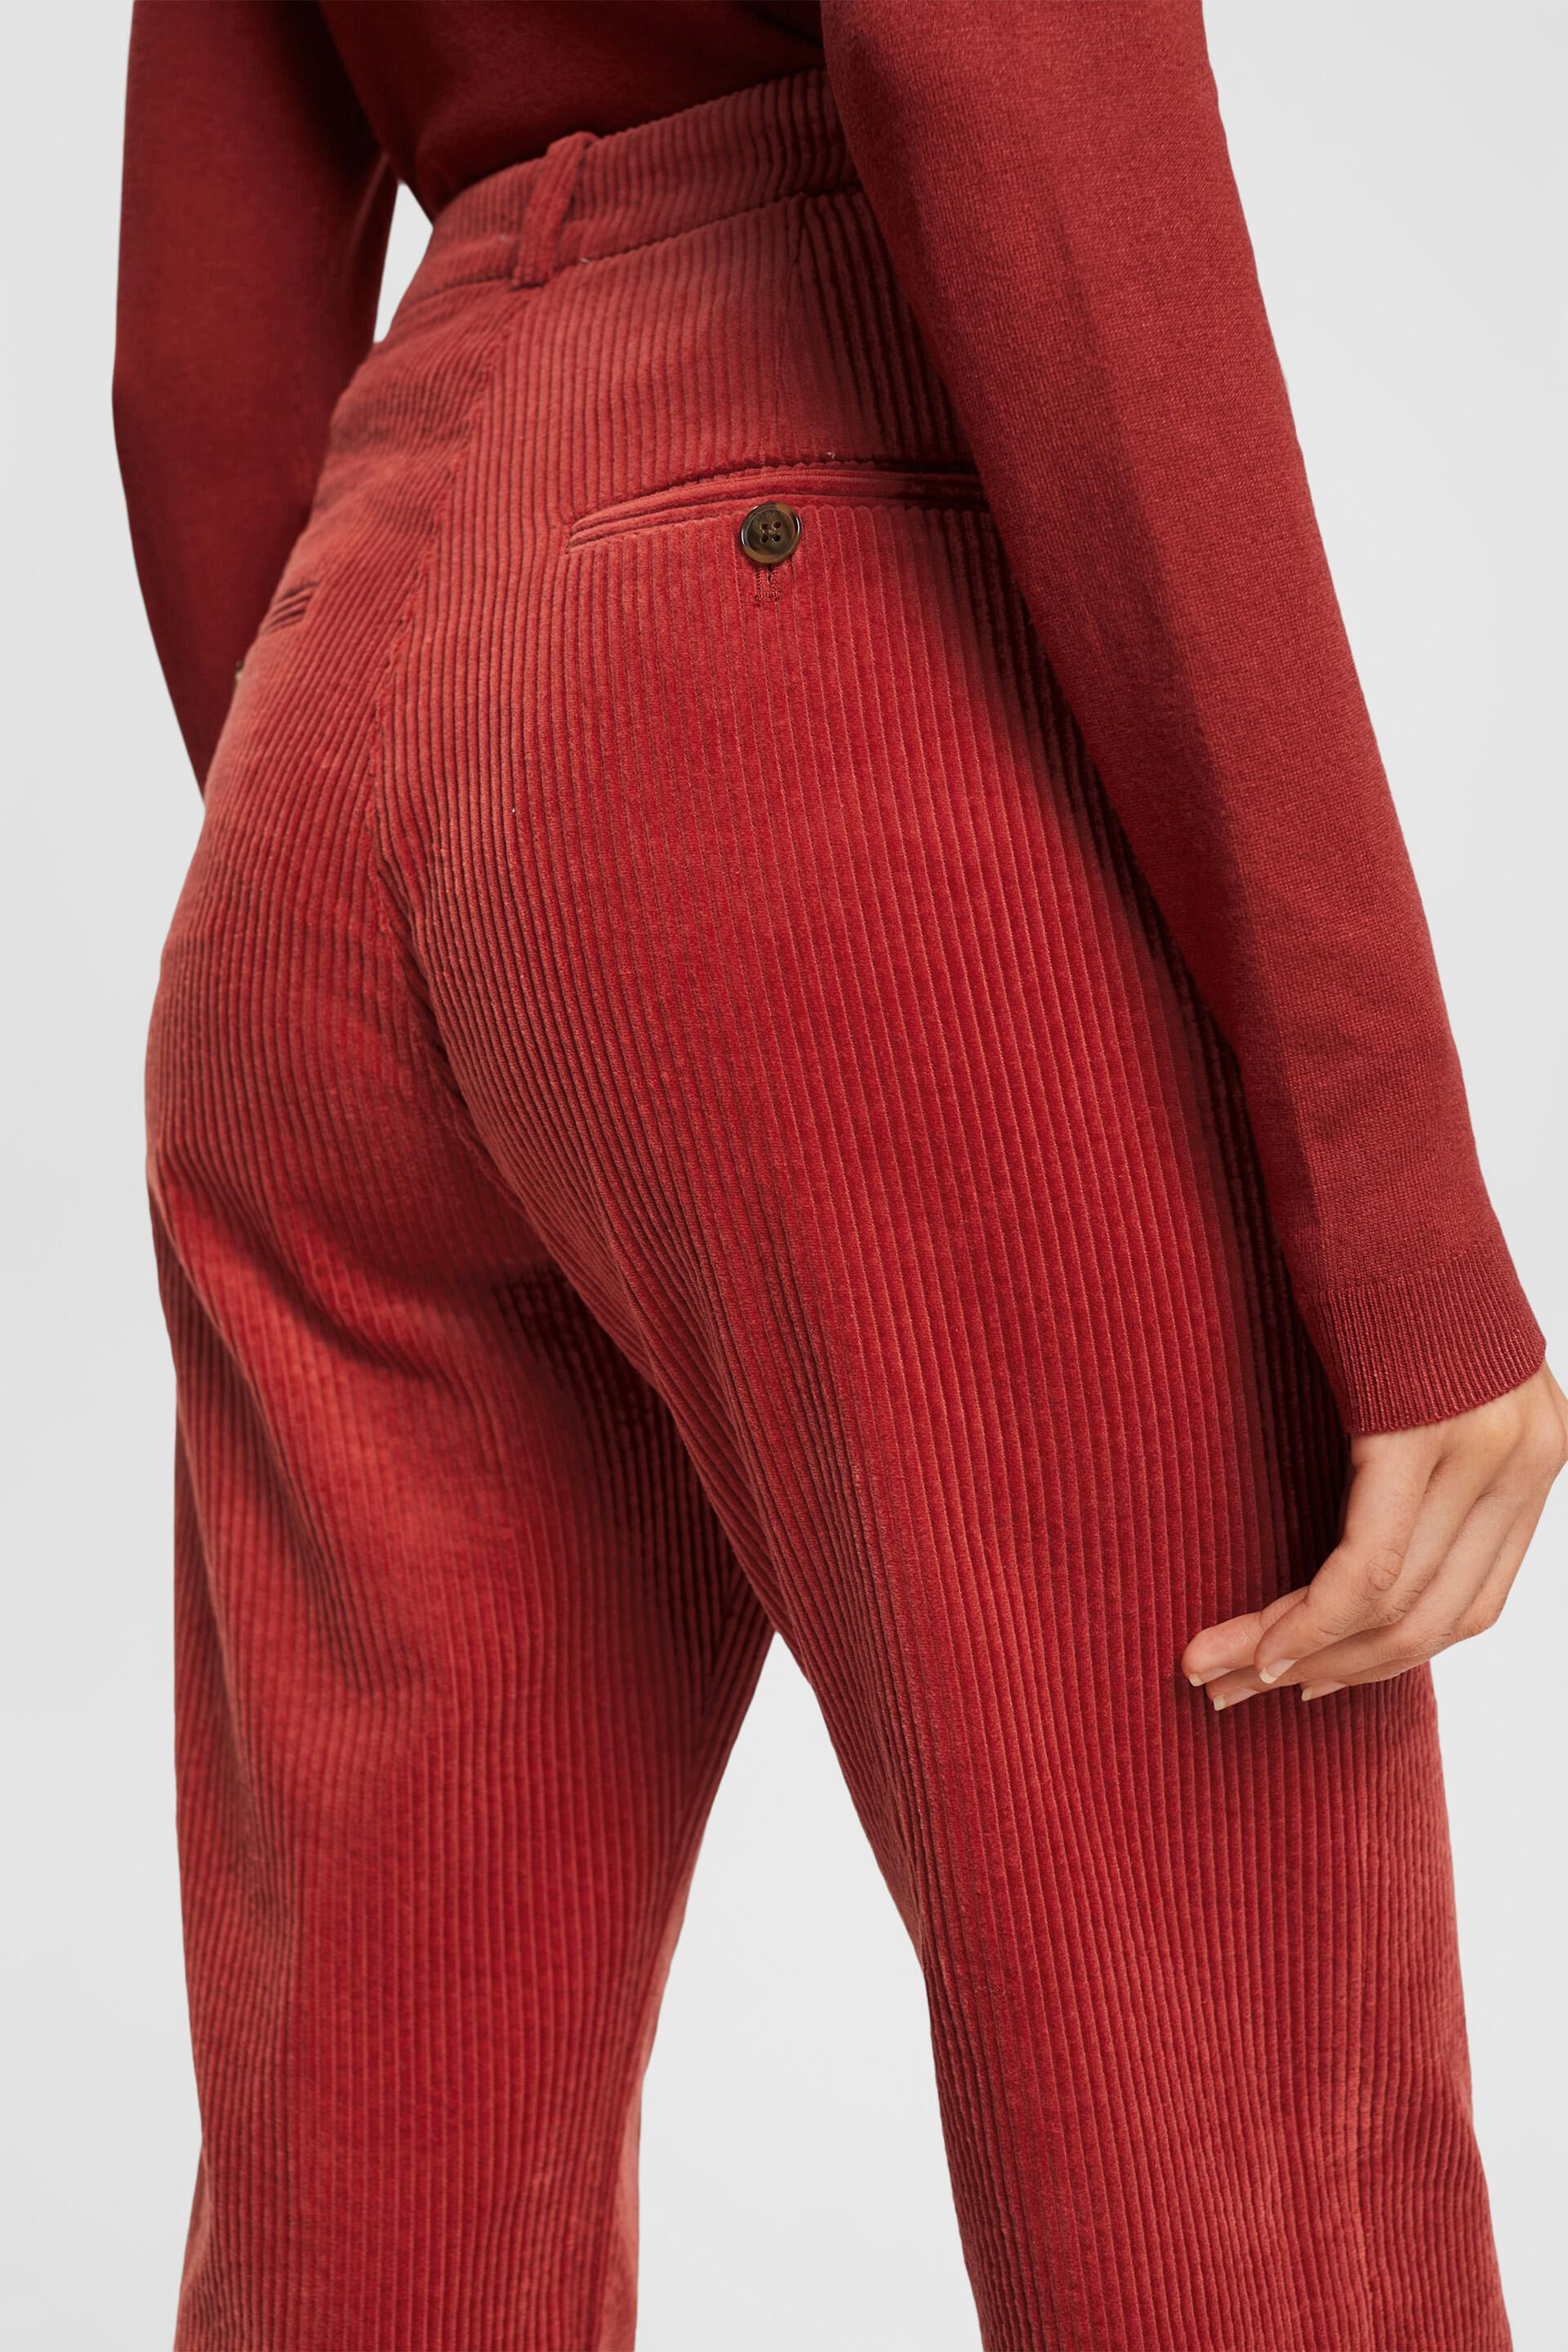 US POLO ASSN Bottoms  Buy US POLO ASSN Boys Dark Red Mid Rise Corduroy  Trousers Online  Nykaa Fashion